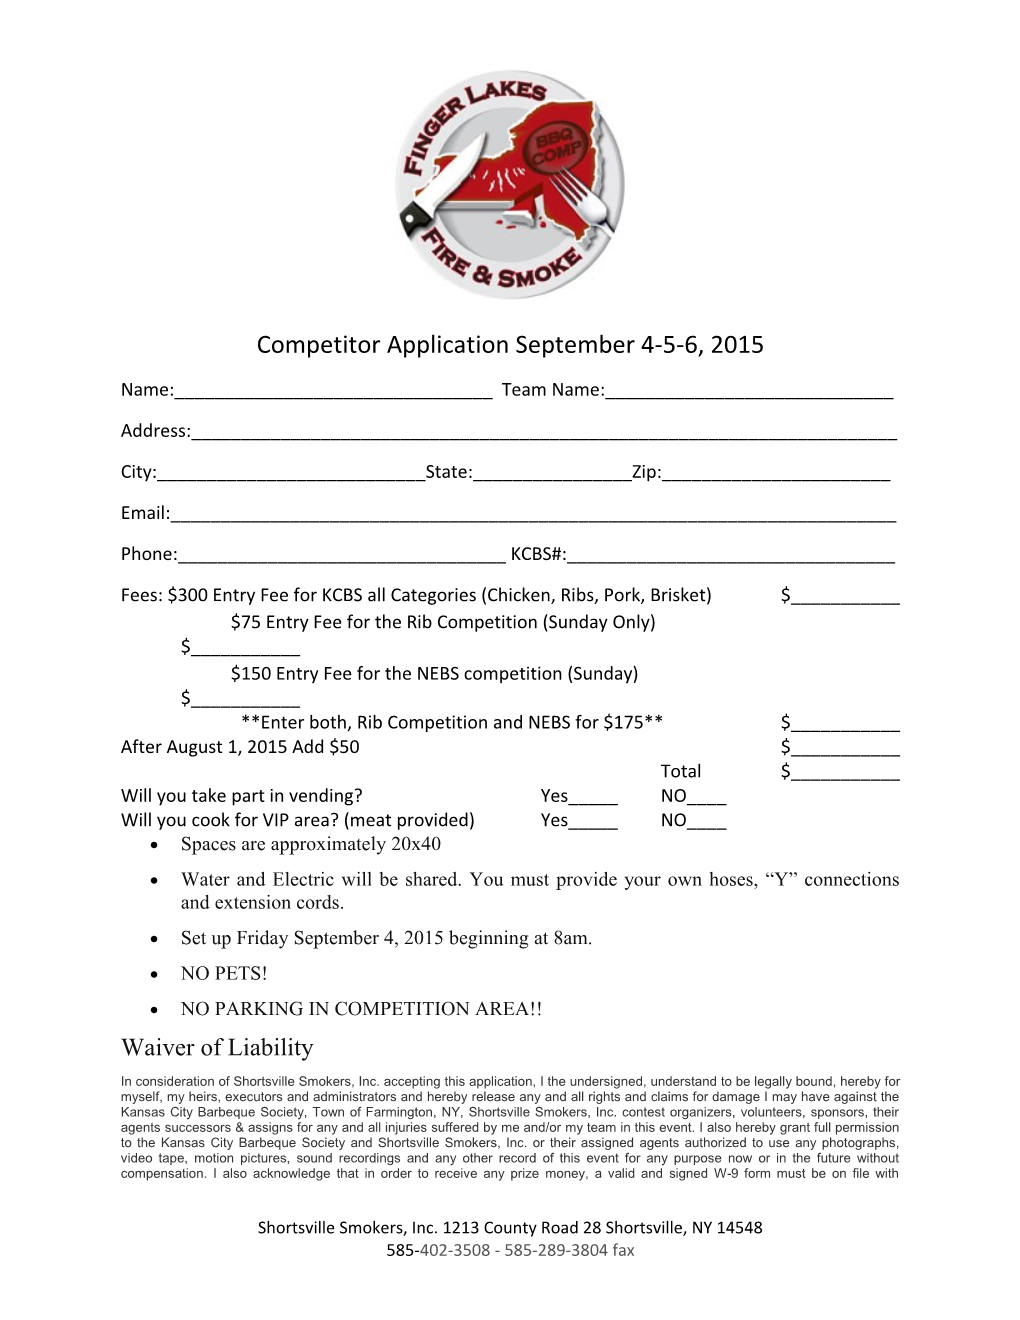 Competitor Application September 4-5-6, 2015